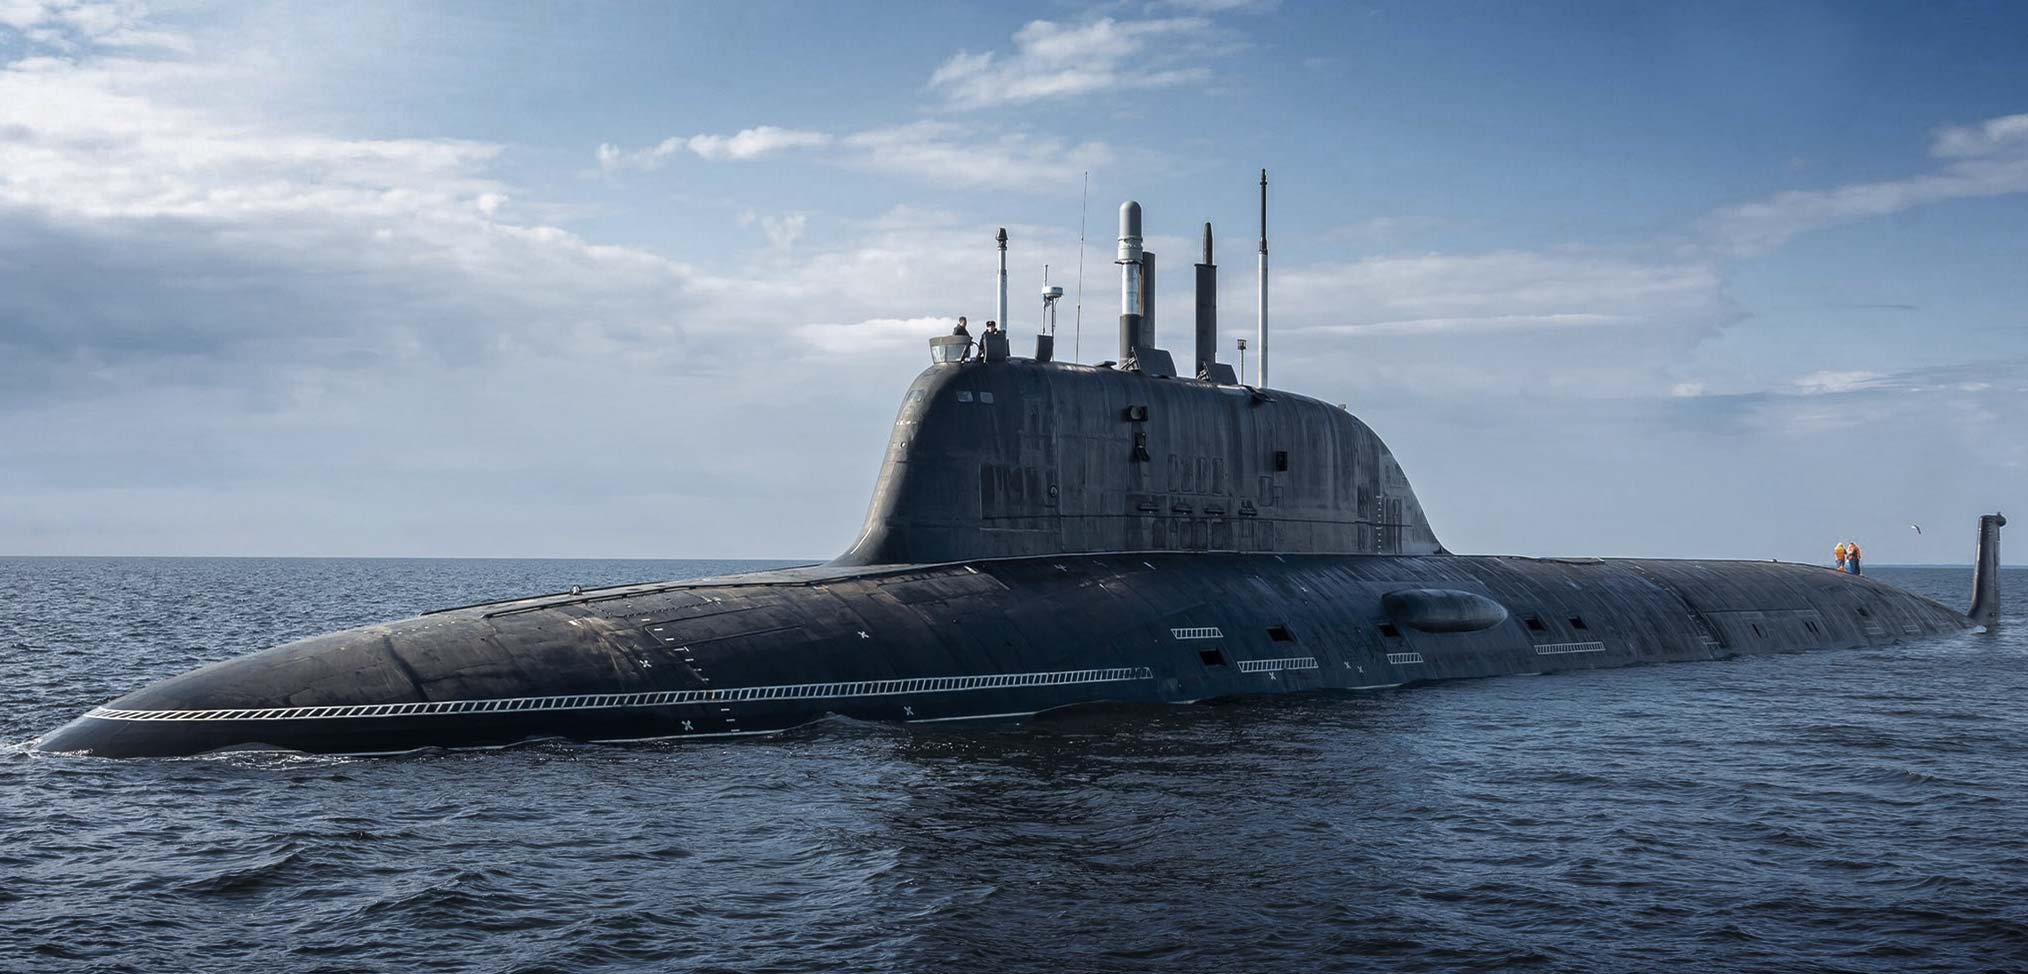 Has the Russian submarine threat been diminished by the Ukraine war?